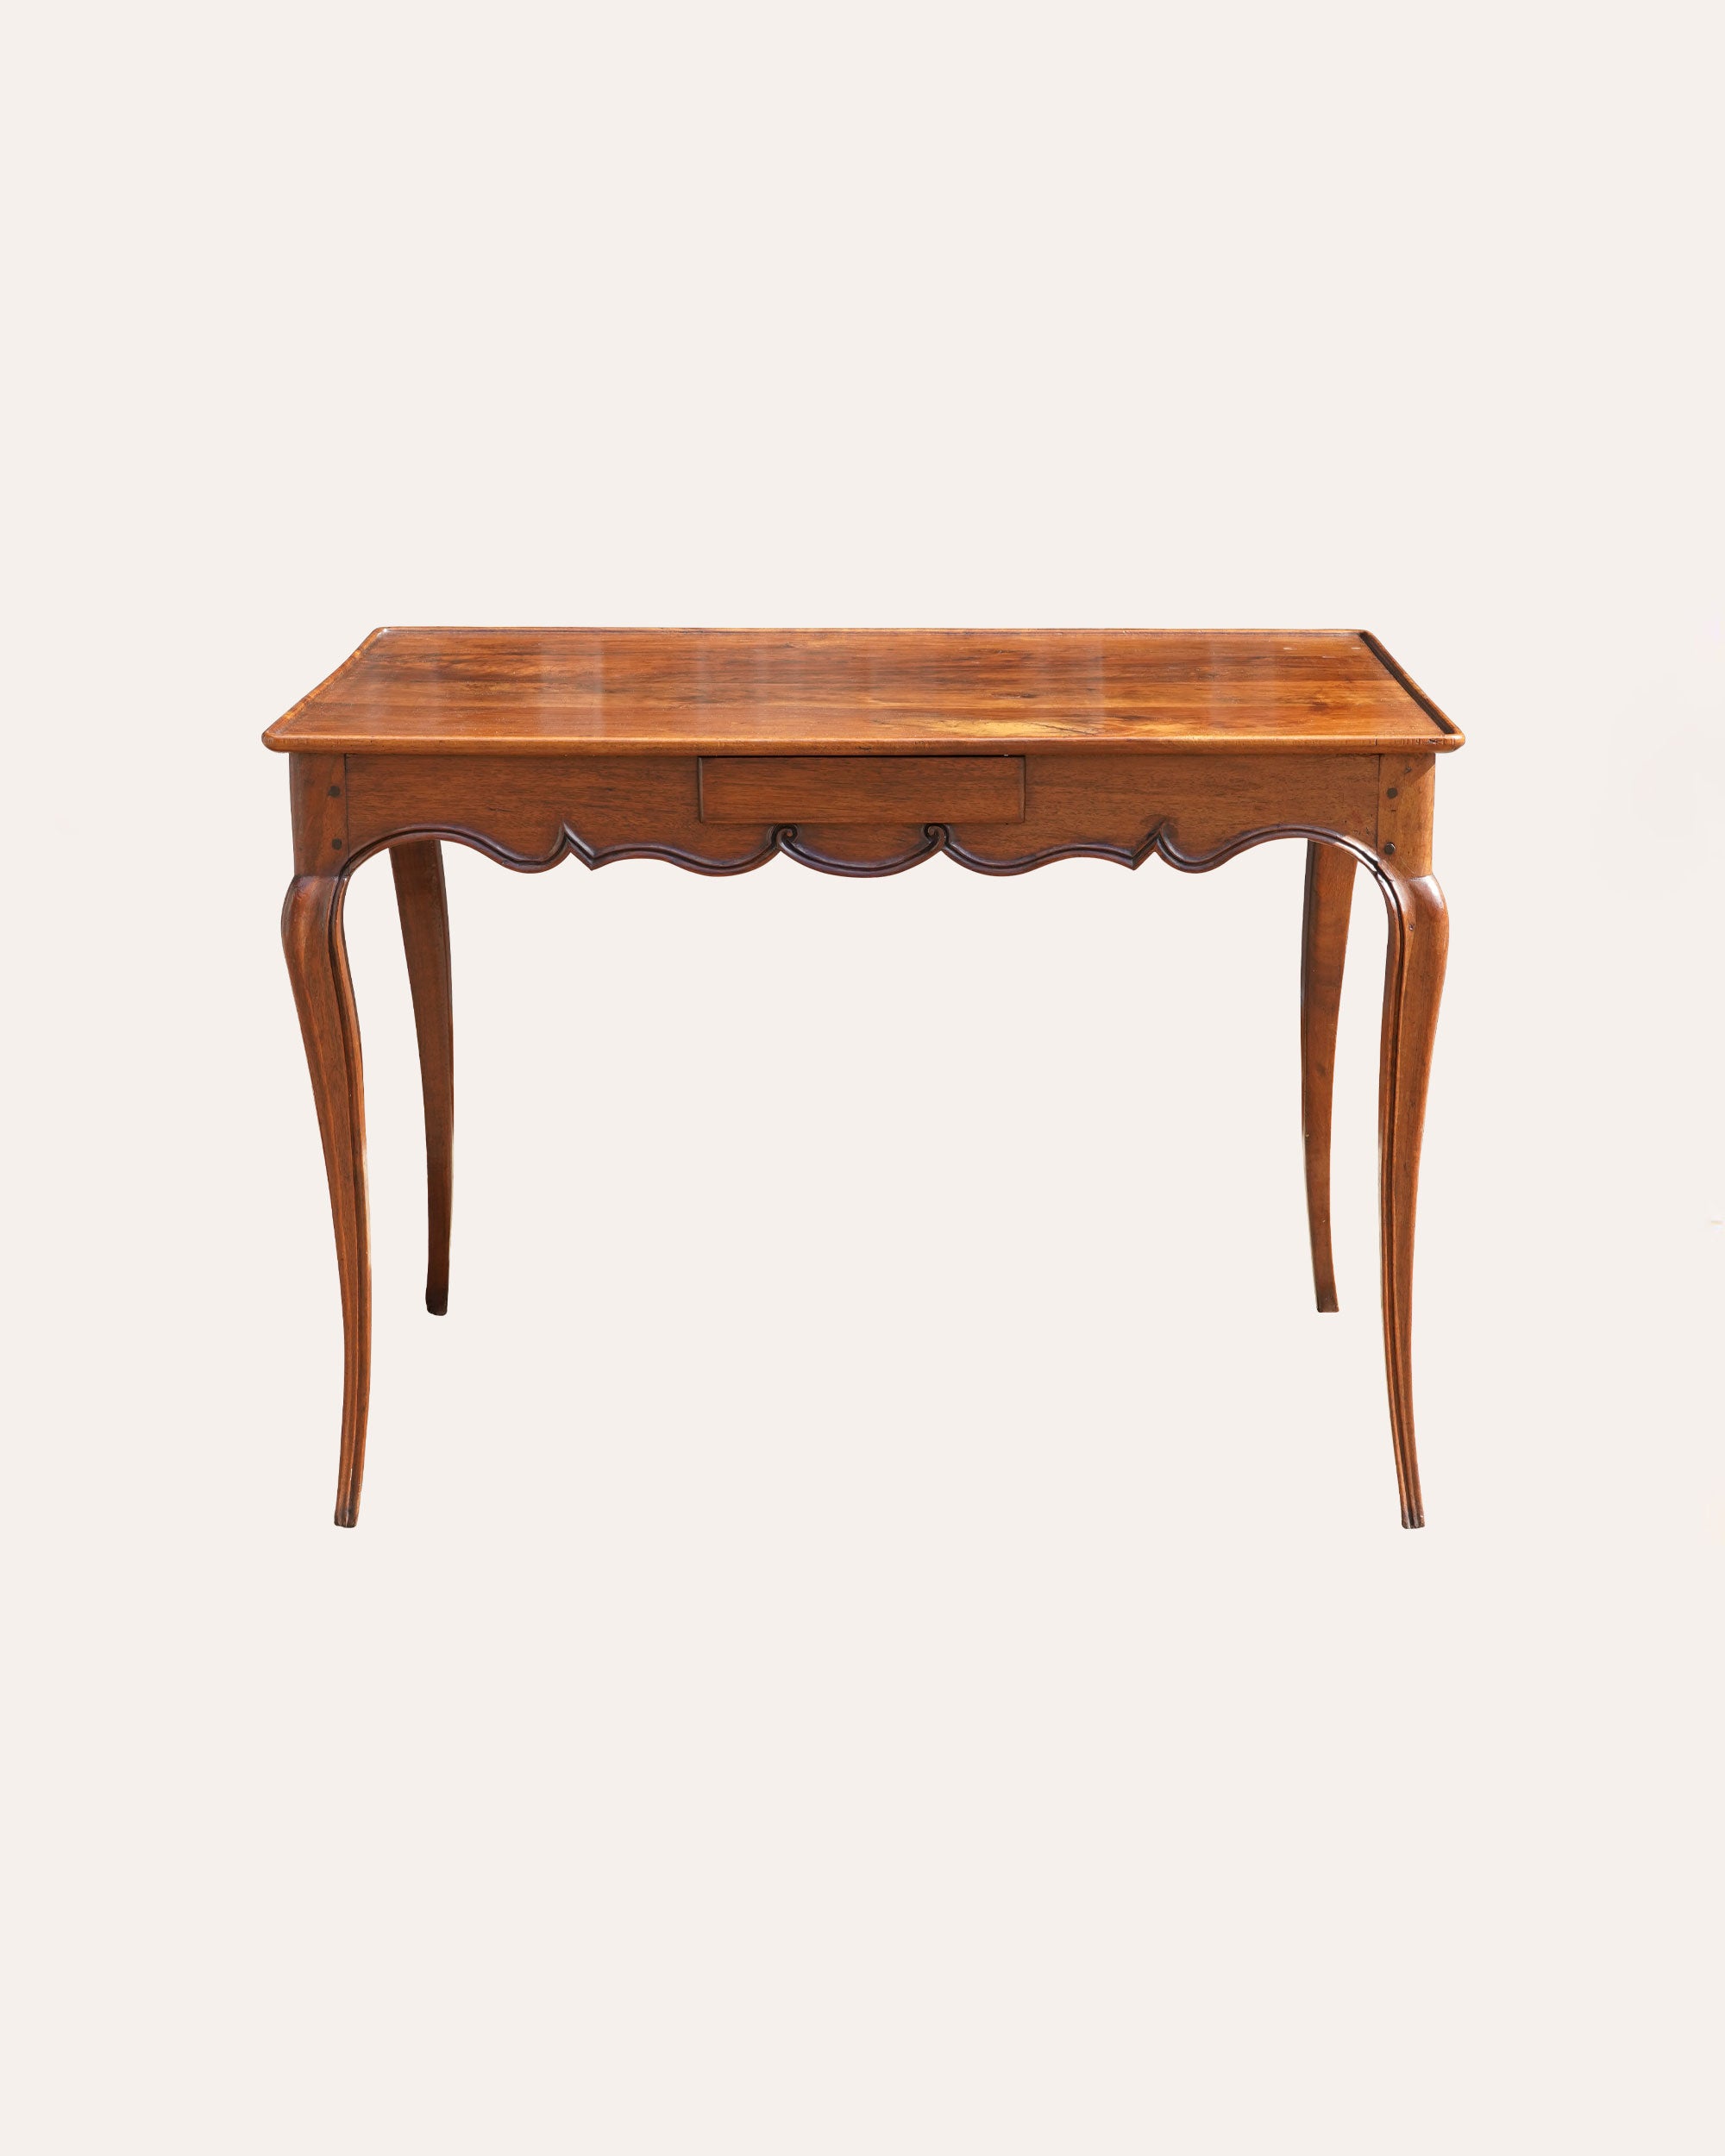 French late 18th Century mahogany table with three small drawers, c1890